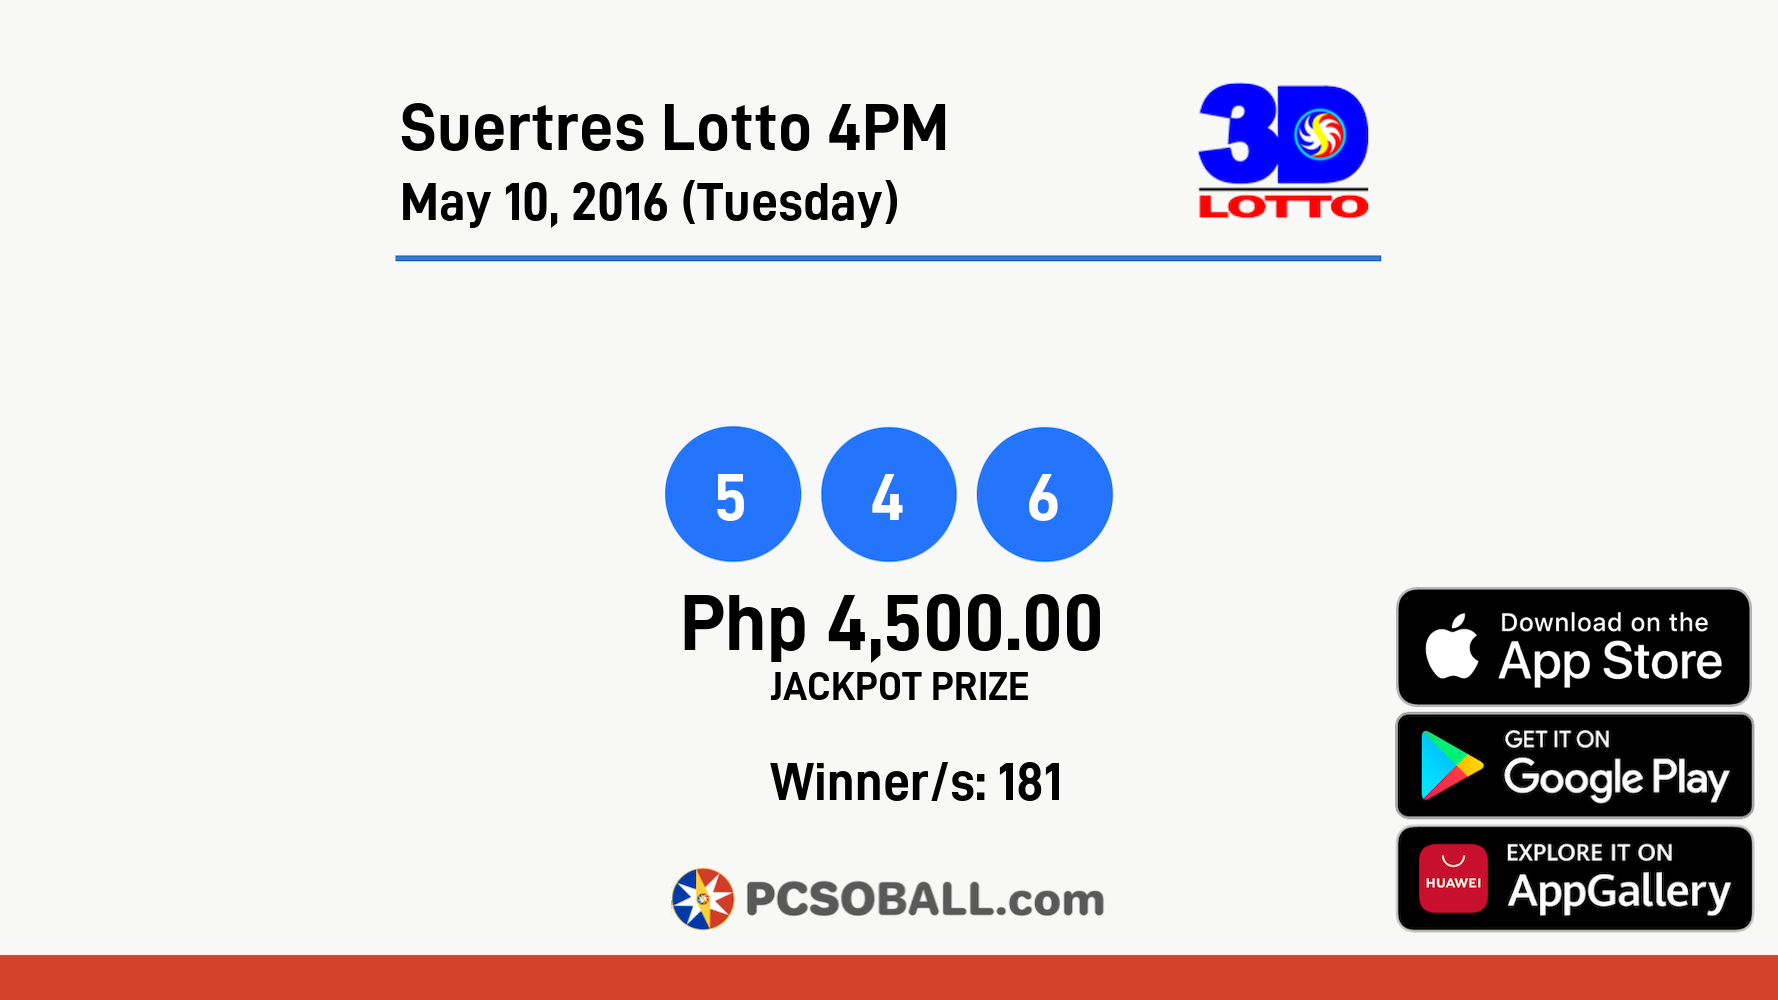 Suertres Lotto 4PM May 10, 2016 (Tuesday) Result